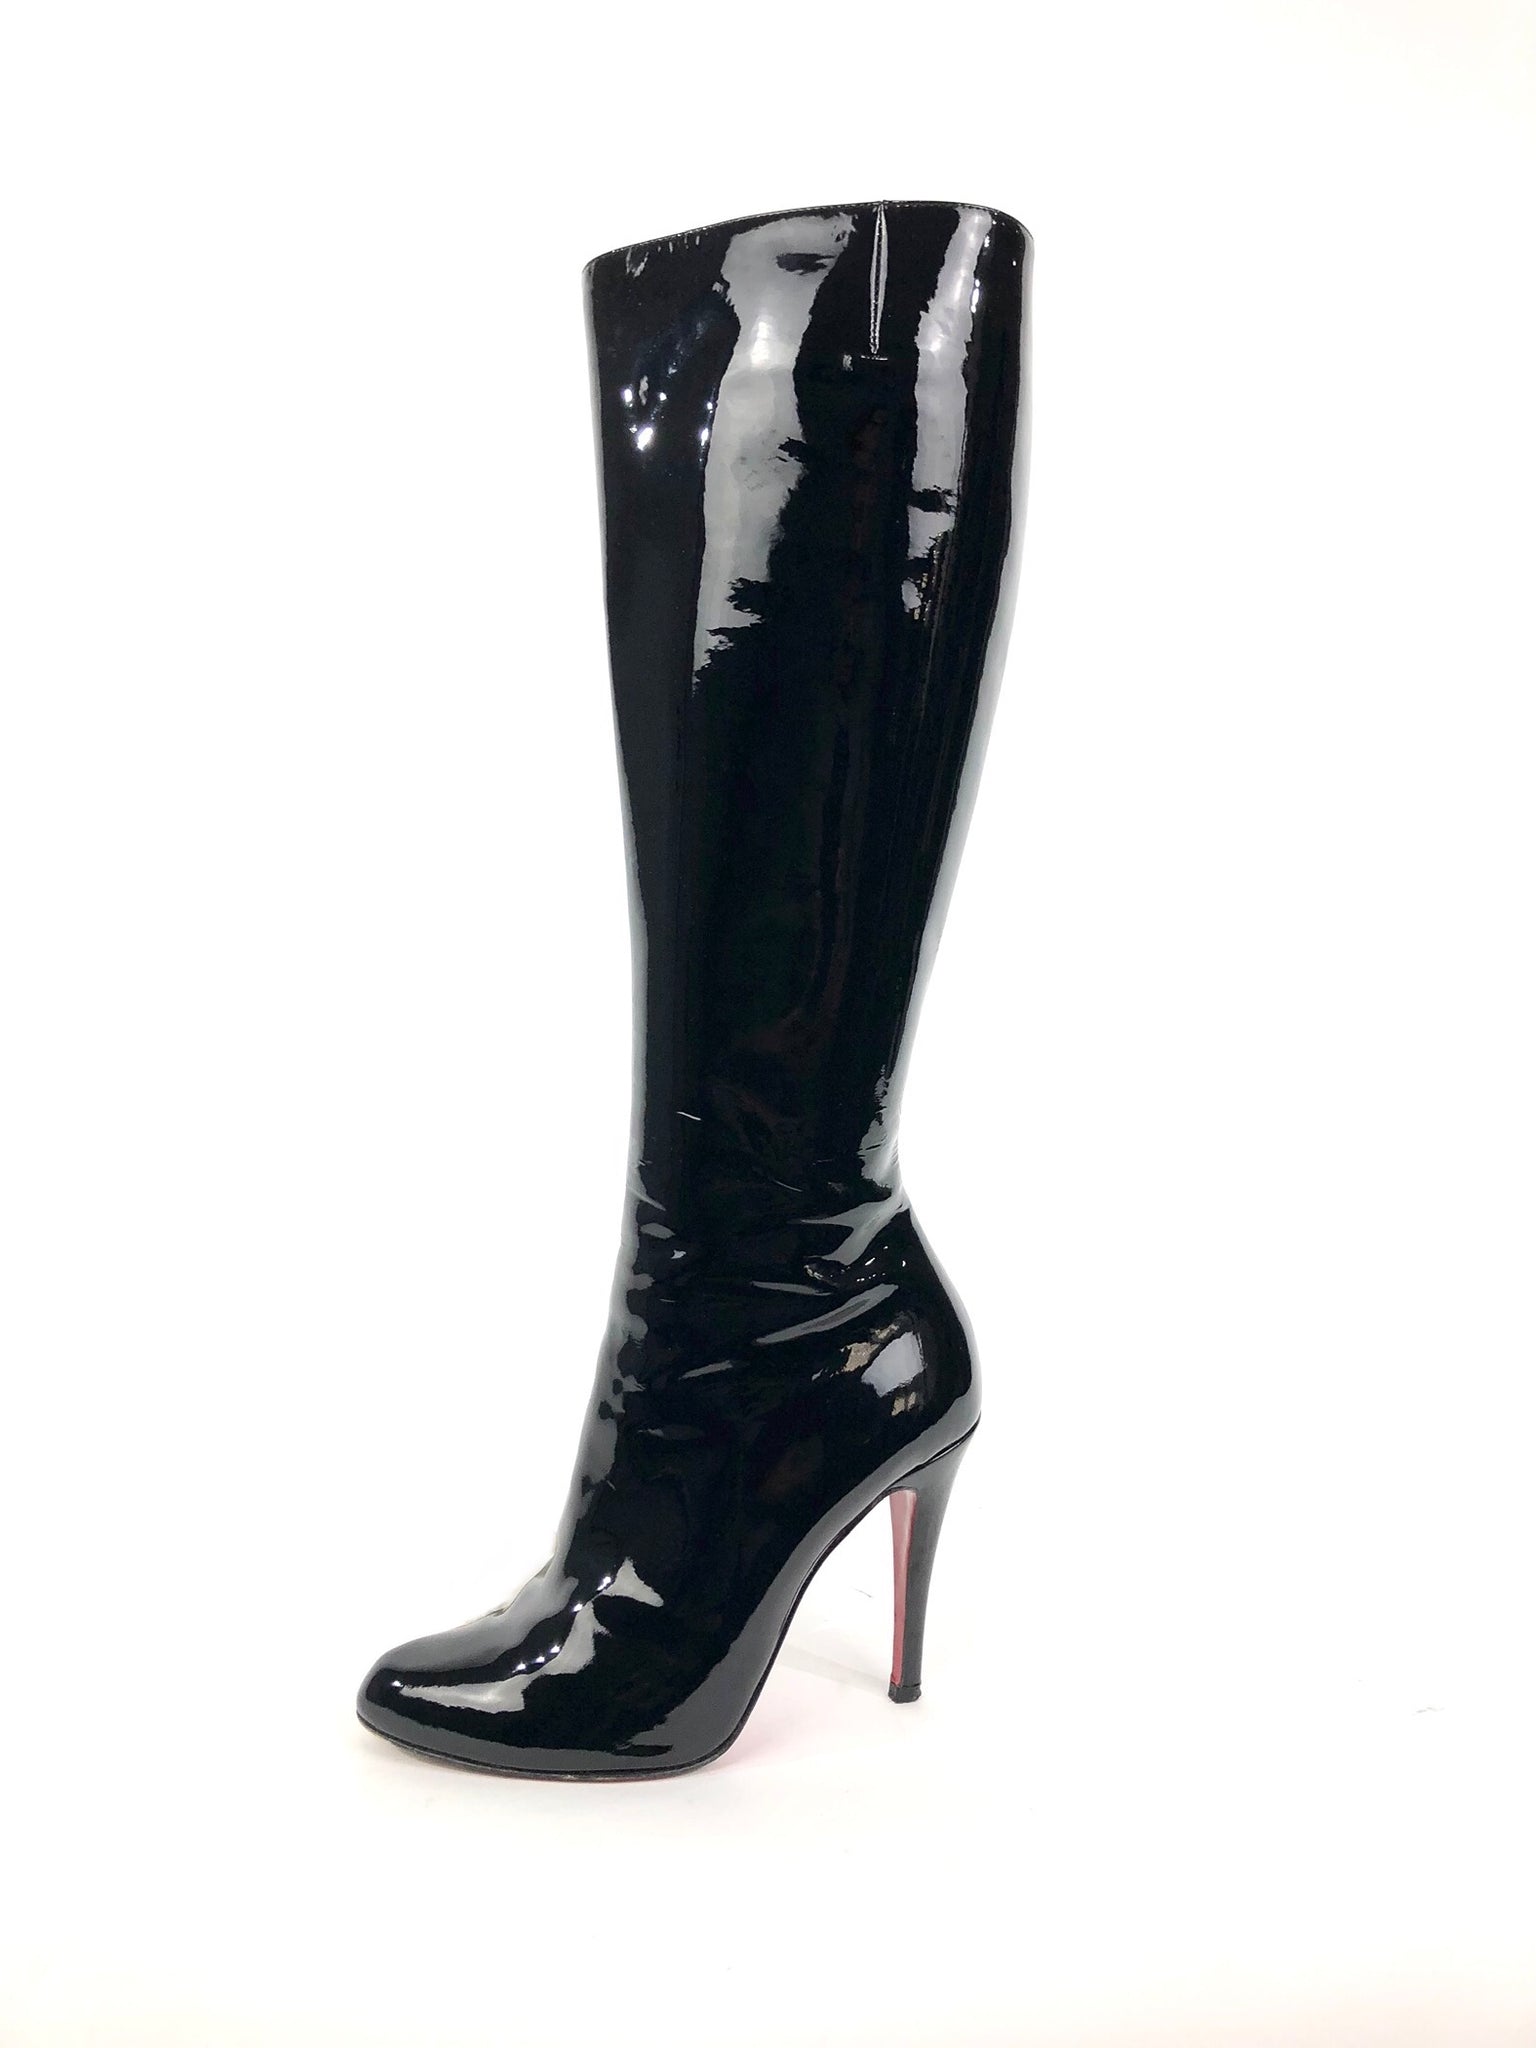 Leather boots Christian Louboutin Black size 38.5 EU in Leather